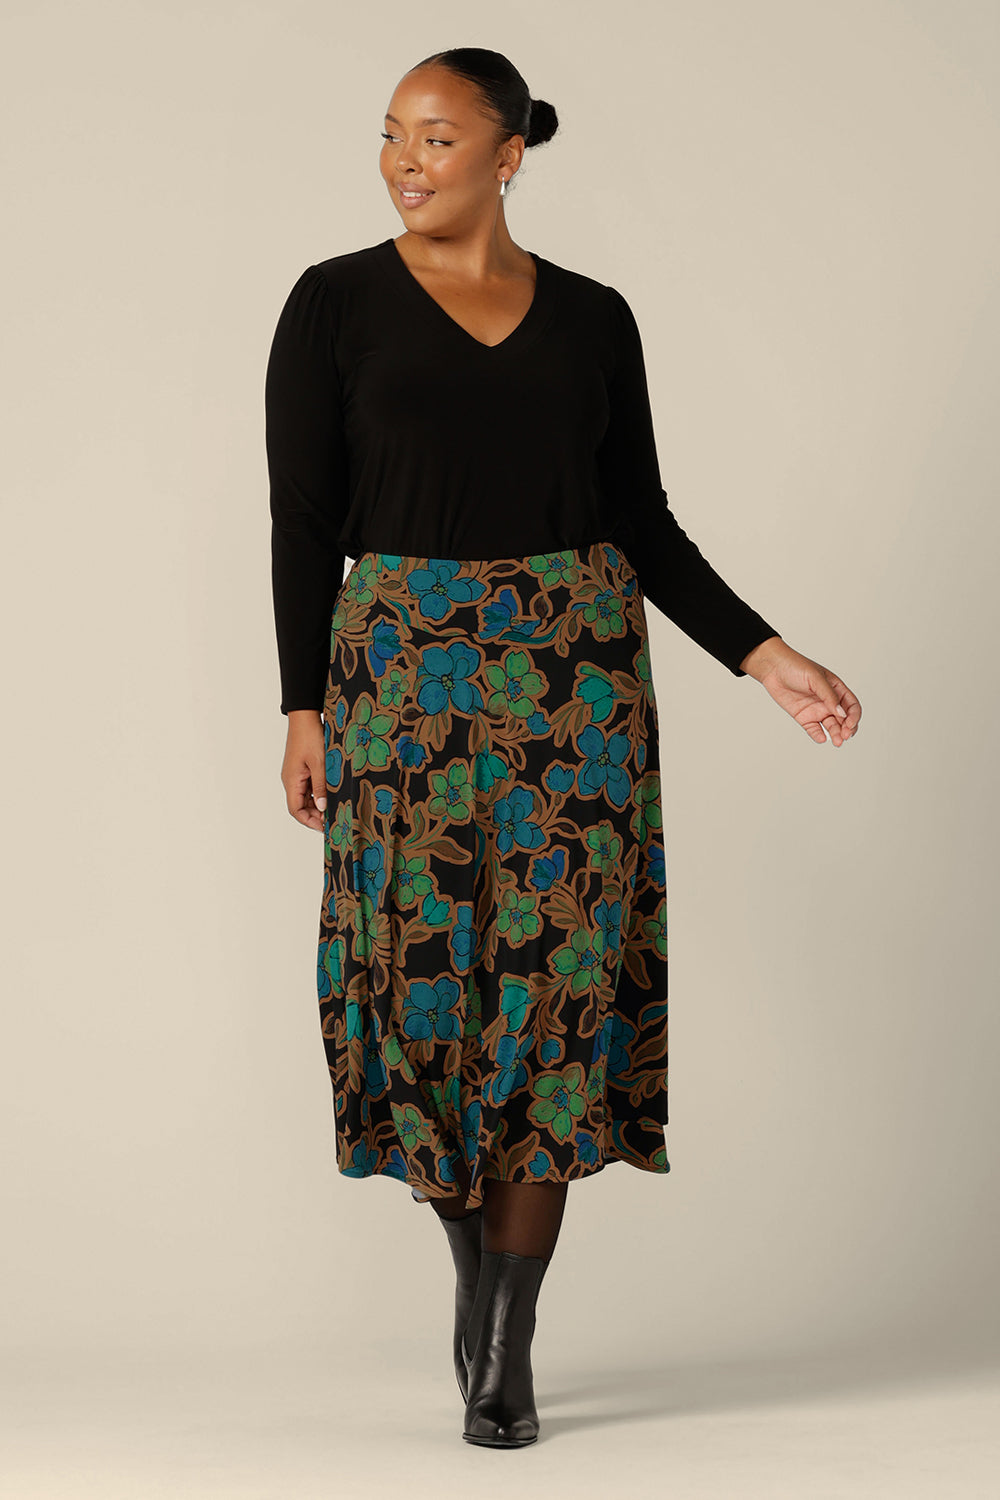 An asymmetric, midi skirt by Australian and New Zealand women's clothing brand, L&F. The Germaine Skirt in floral 'Secret Garden' print jersey is worn with a long sleeve, V-neck top in black jersey.  A good skirt for the modern woman, shop this jersey skirt in sizes 8 to 24.